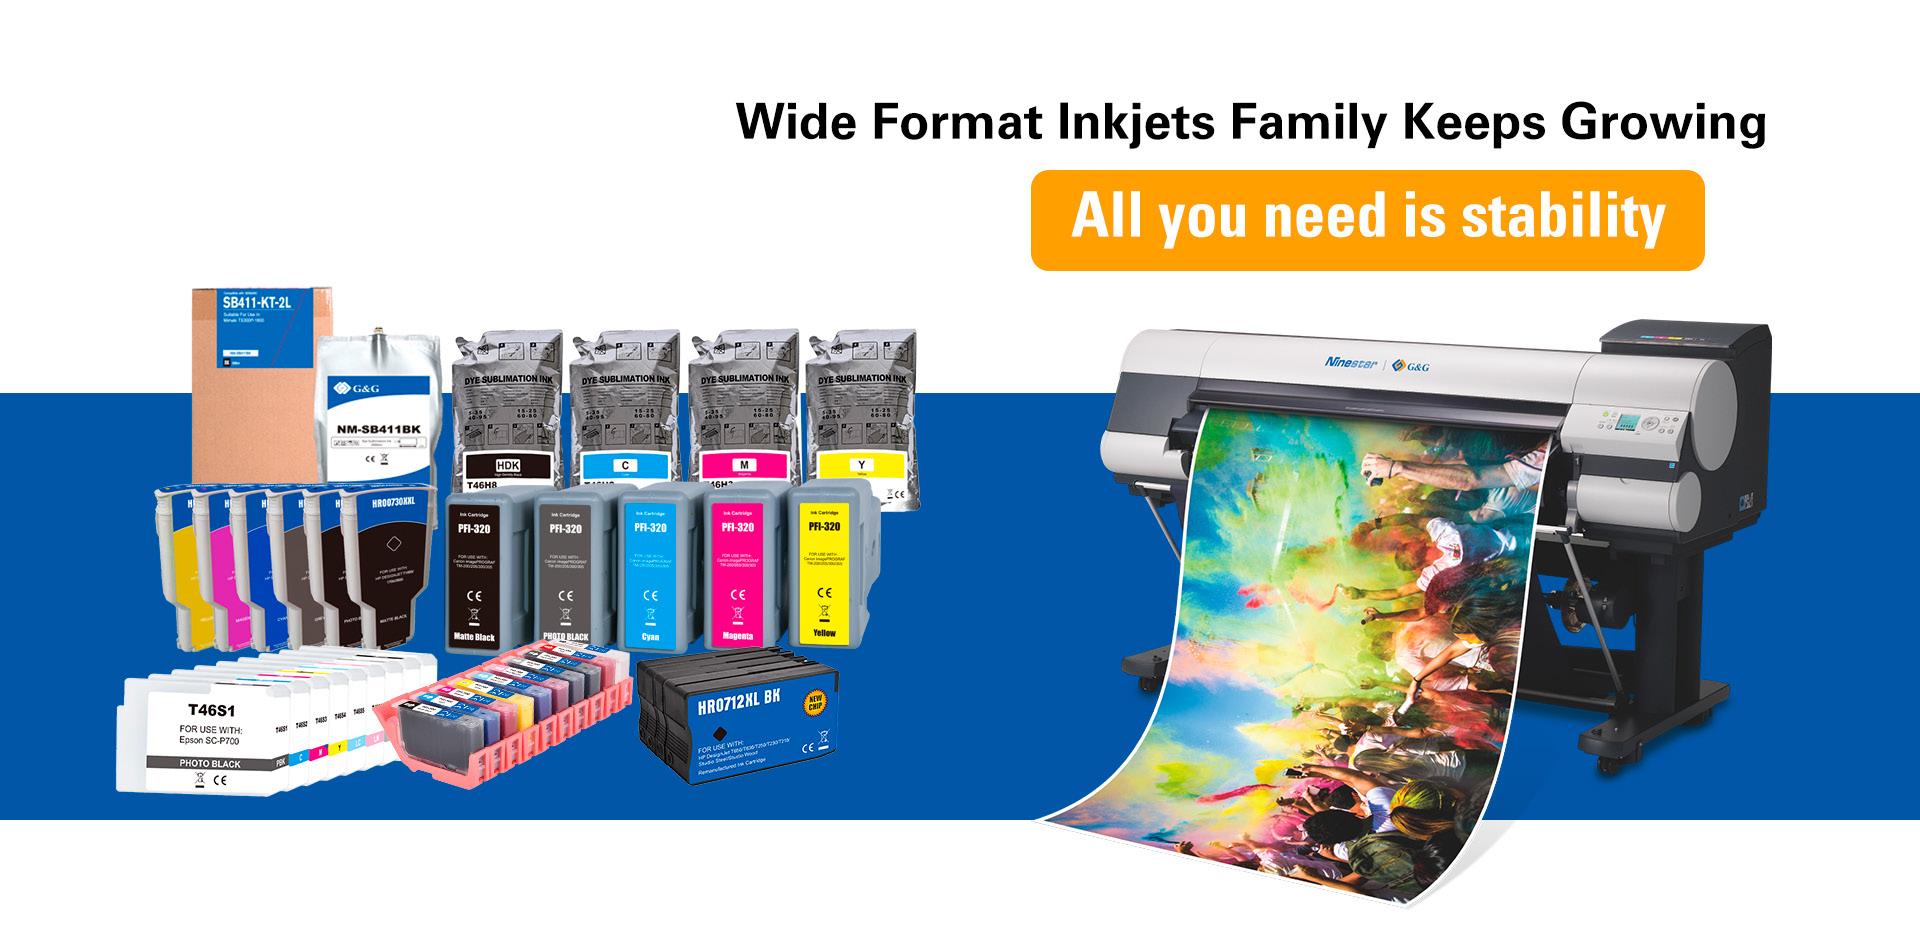 G&G's Wide Format Family